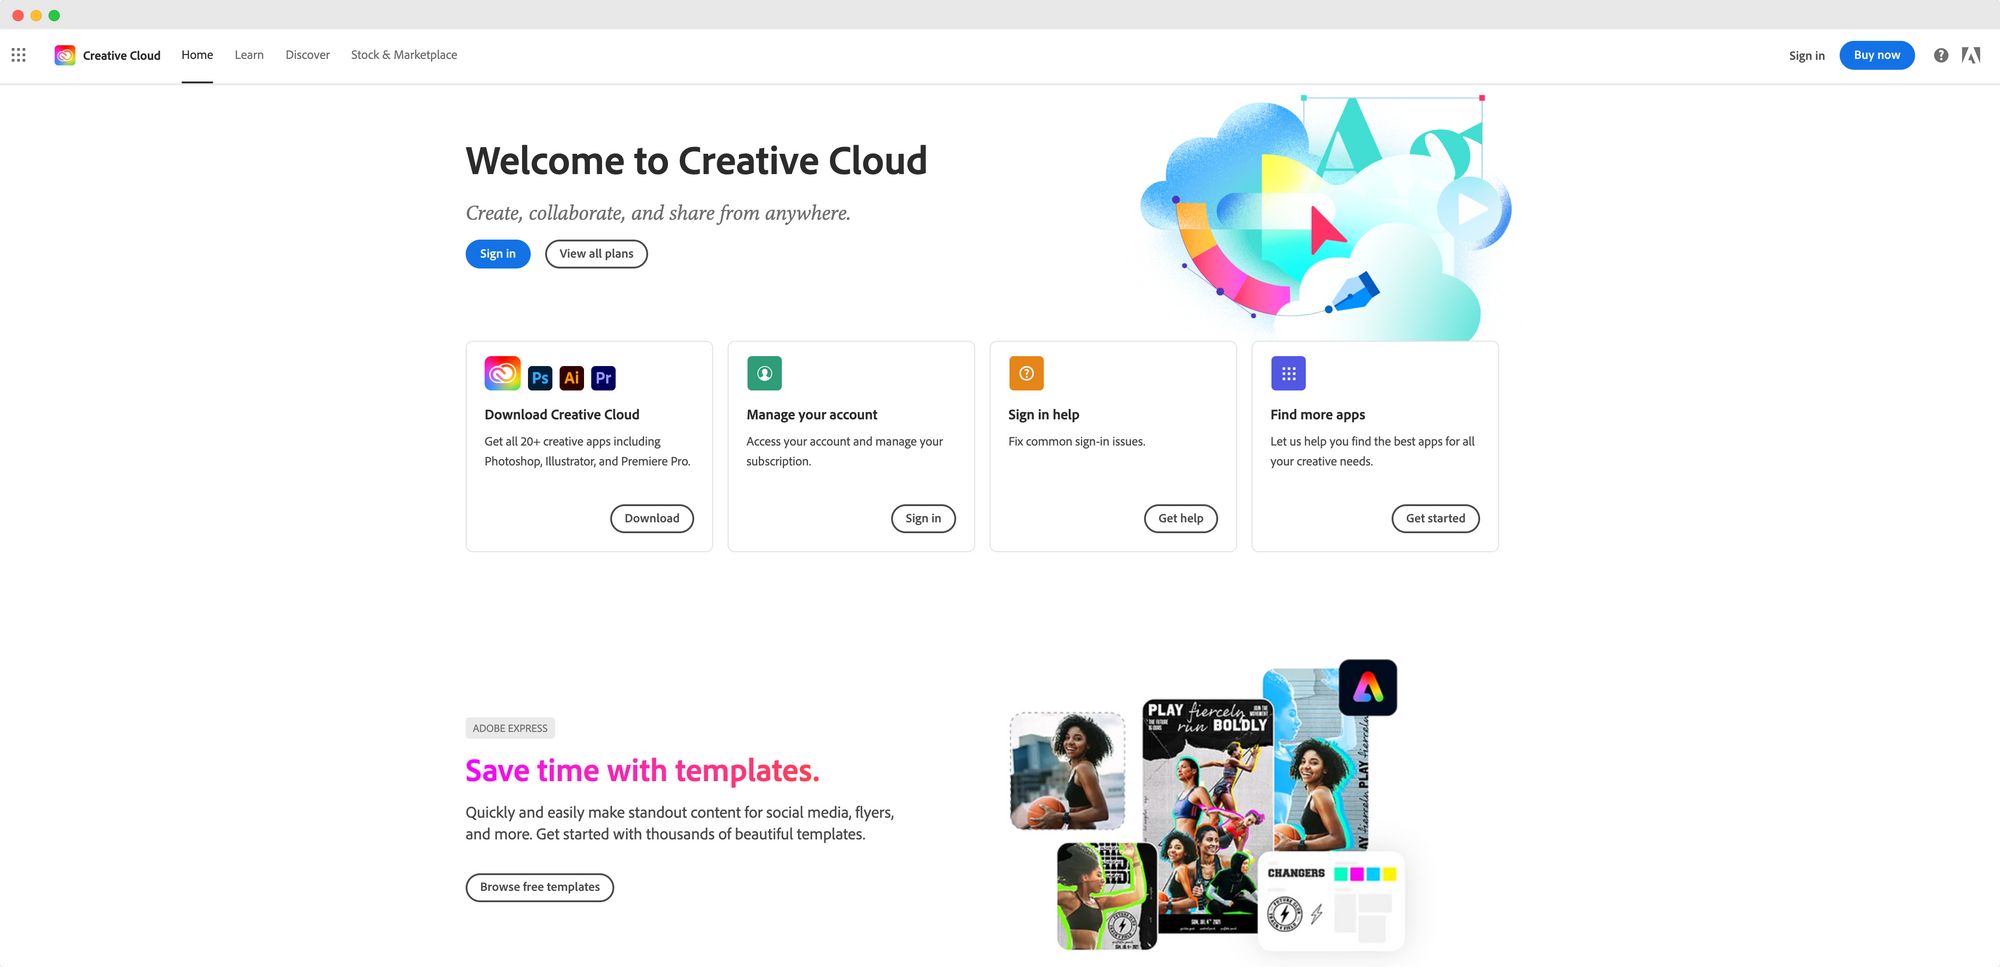 Adobe Creative Cloud website with options to download apps, manage account, and find more apps